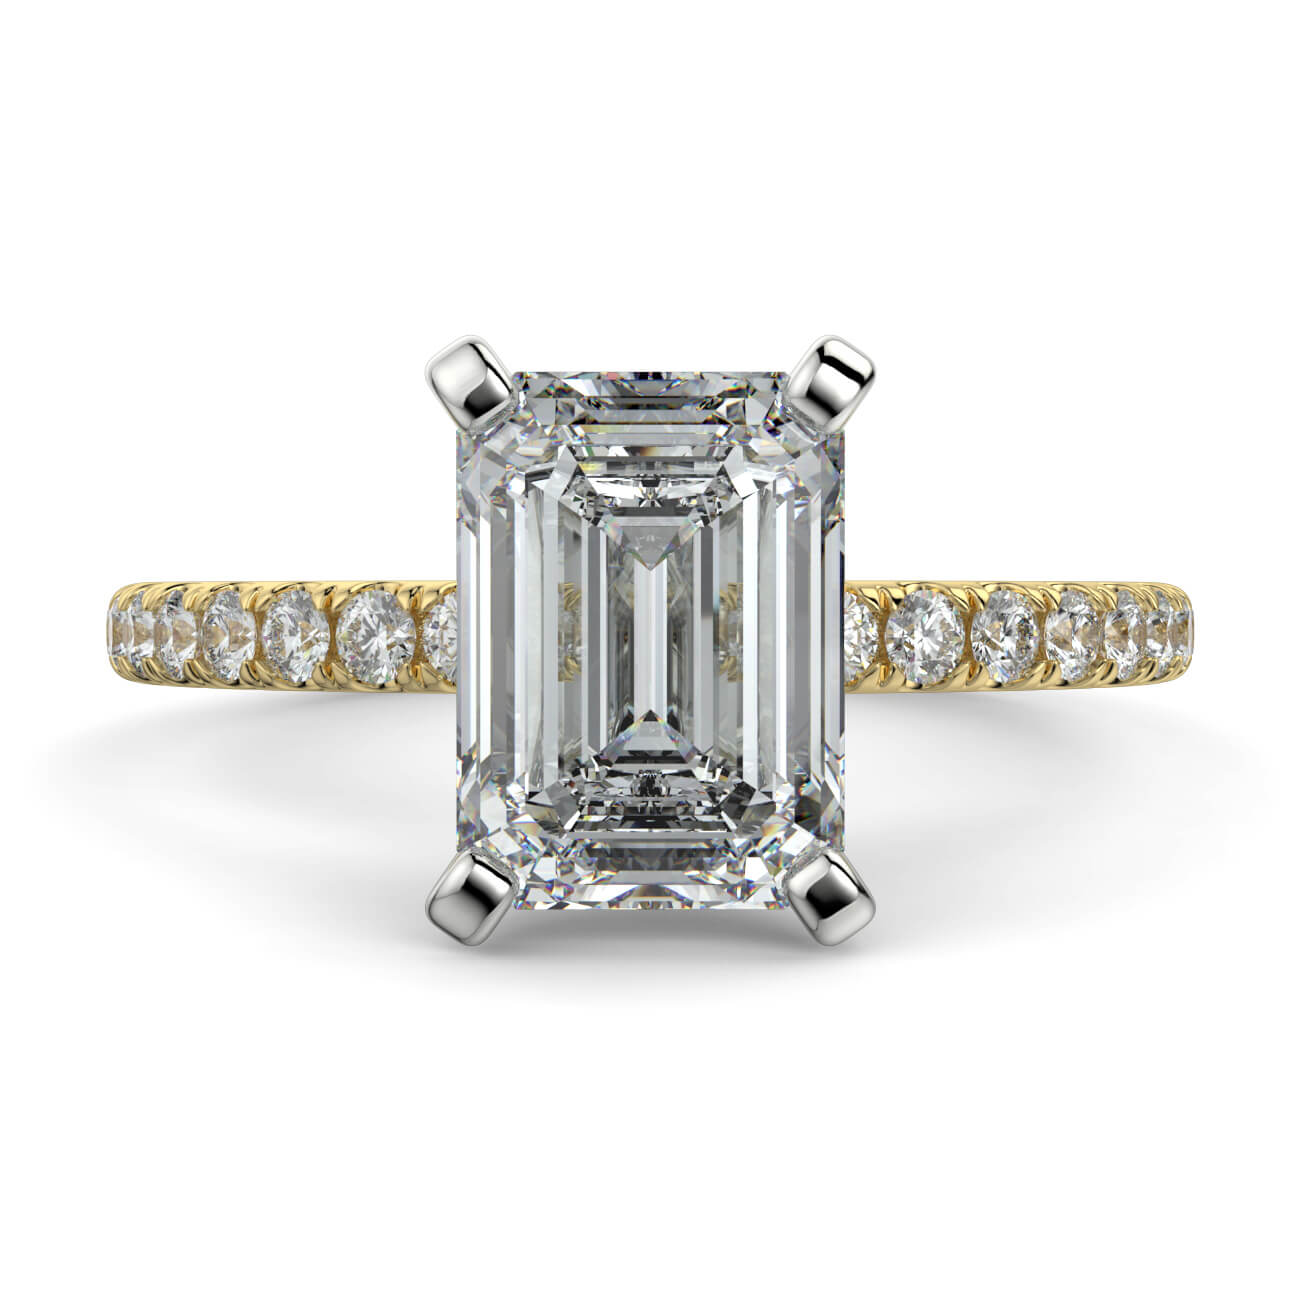 Delicate ‘Liat’ Emerald Cut Diamond Engagement Ring in 18k Yellow and White Gold – Australian Diamond Network